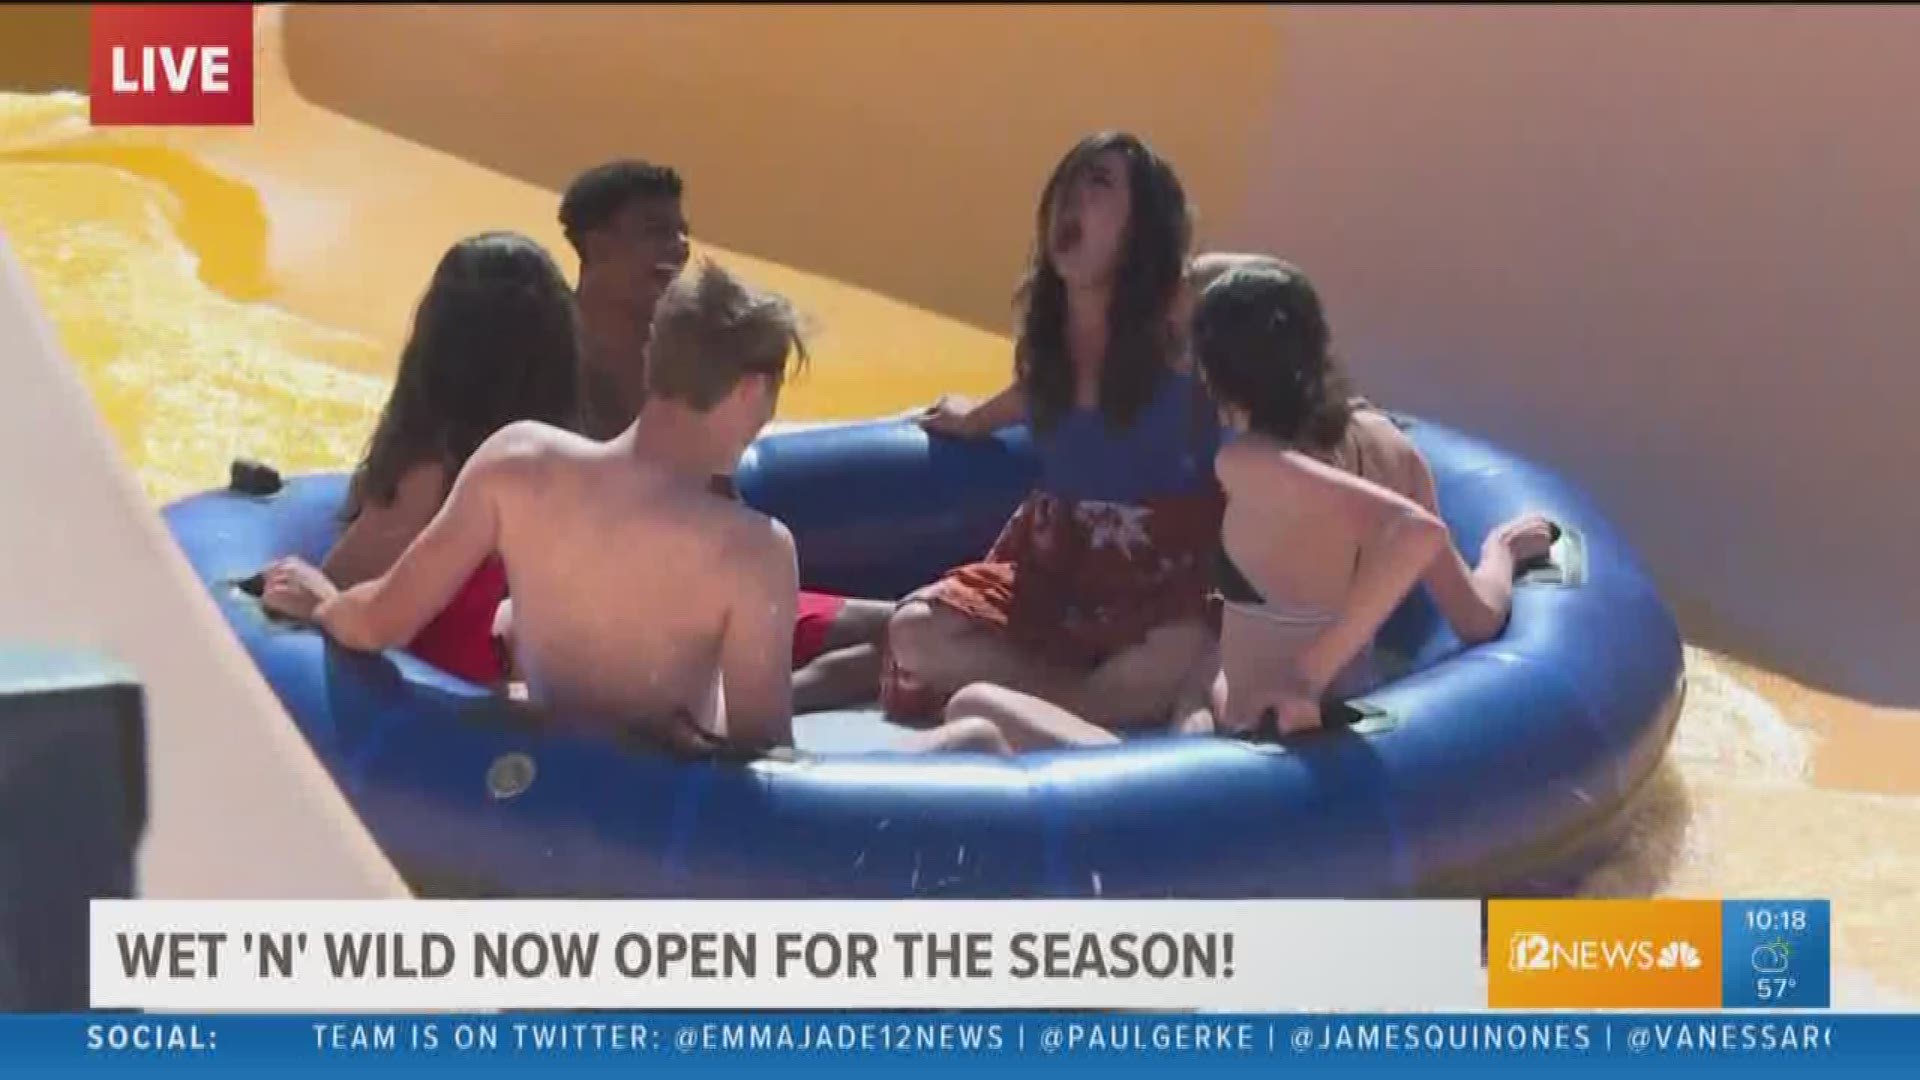 Monica Garcia is going down the slide because the viewers voted for her to do it.